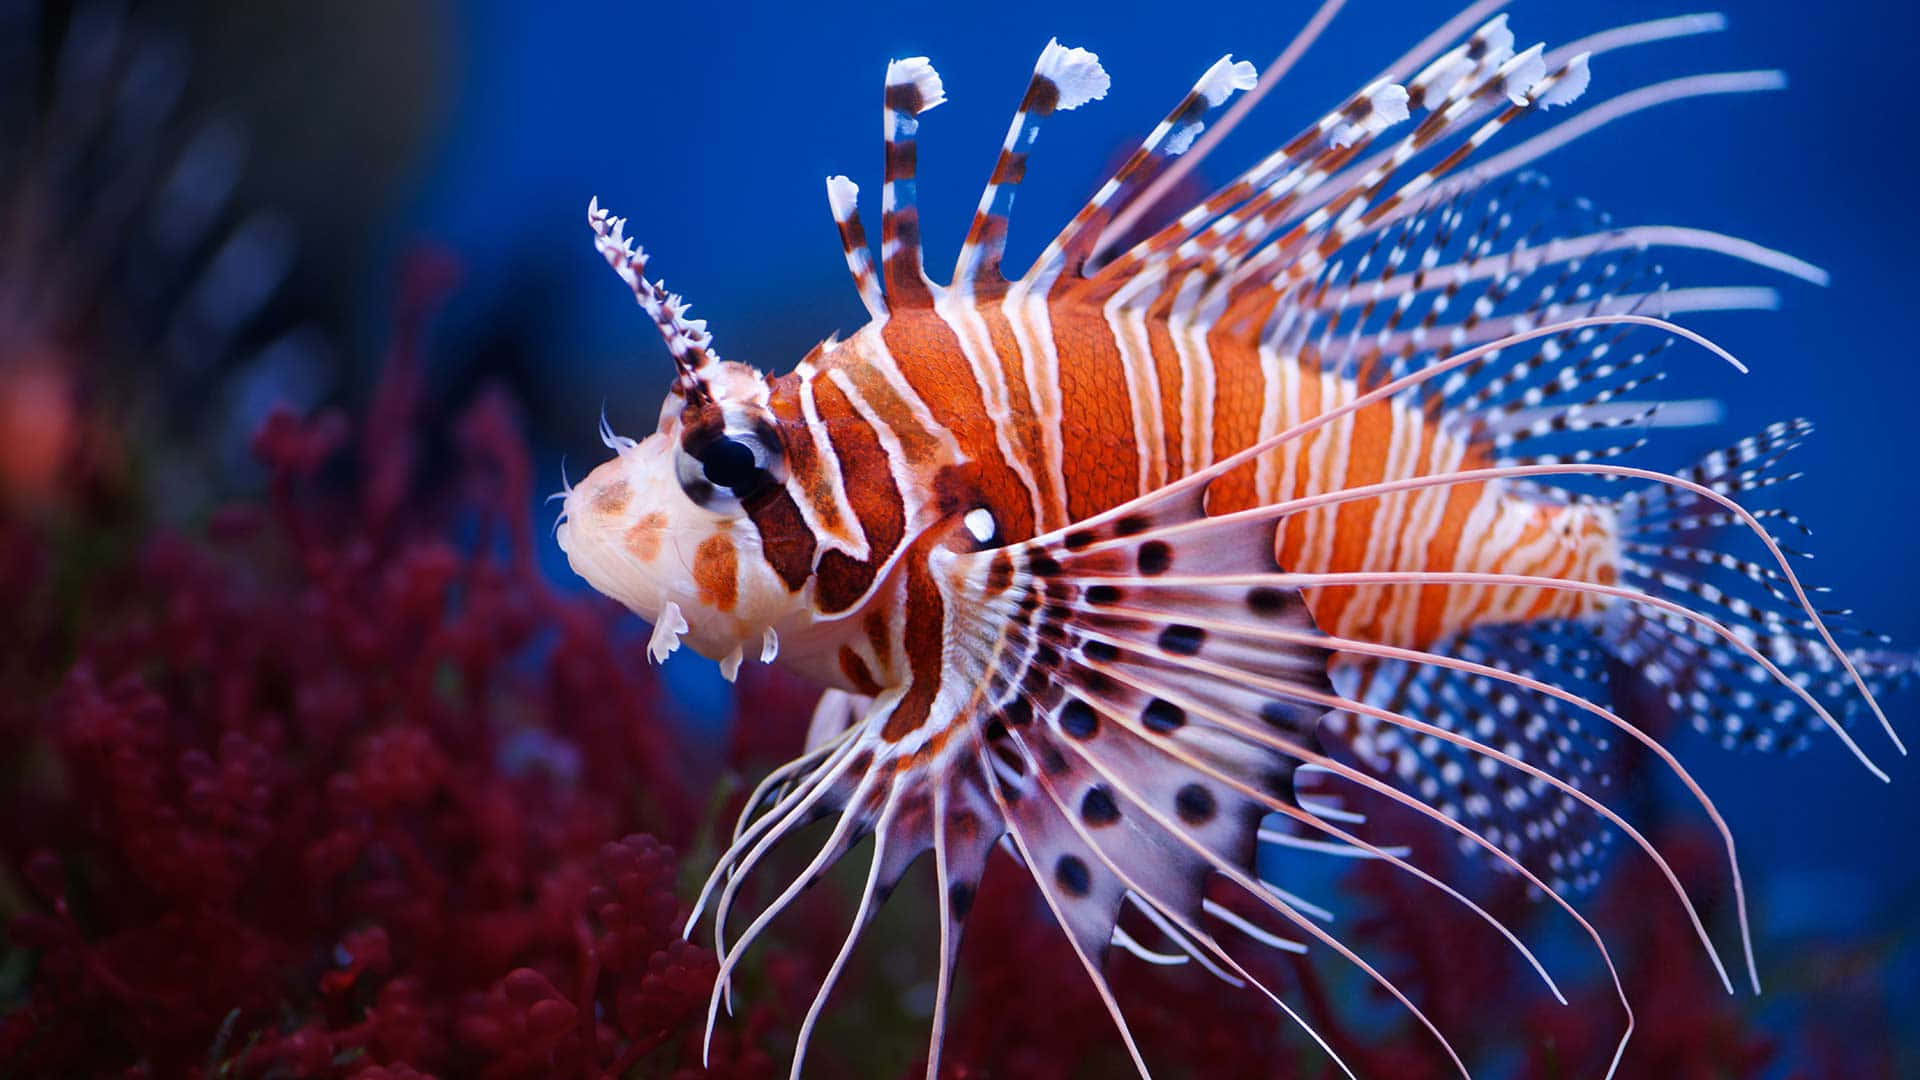 Red Lionfish In Blue Waters.jpg Wallpaper